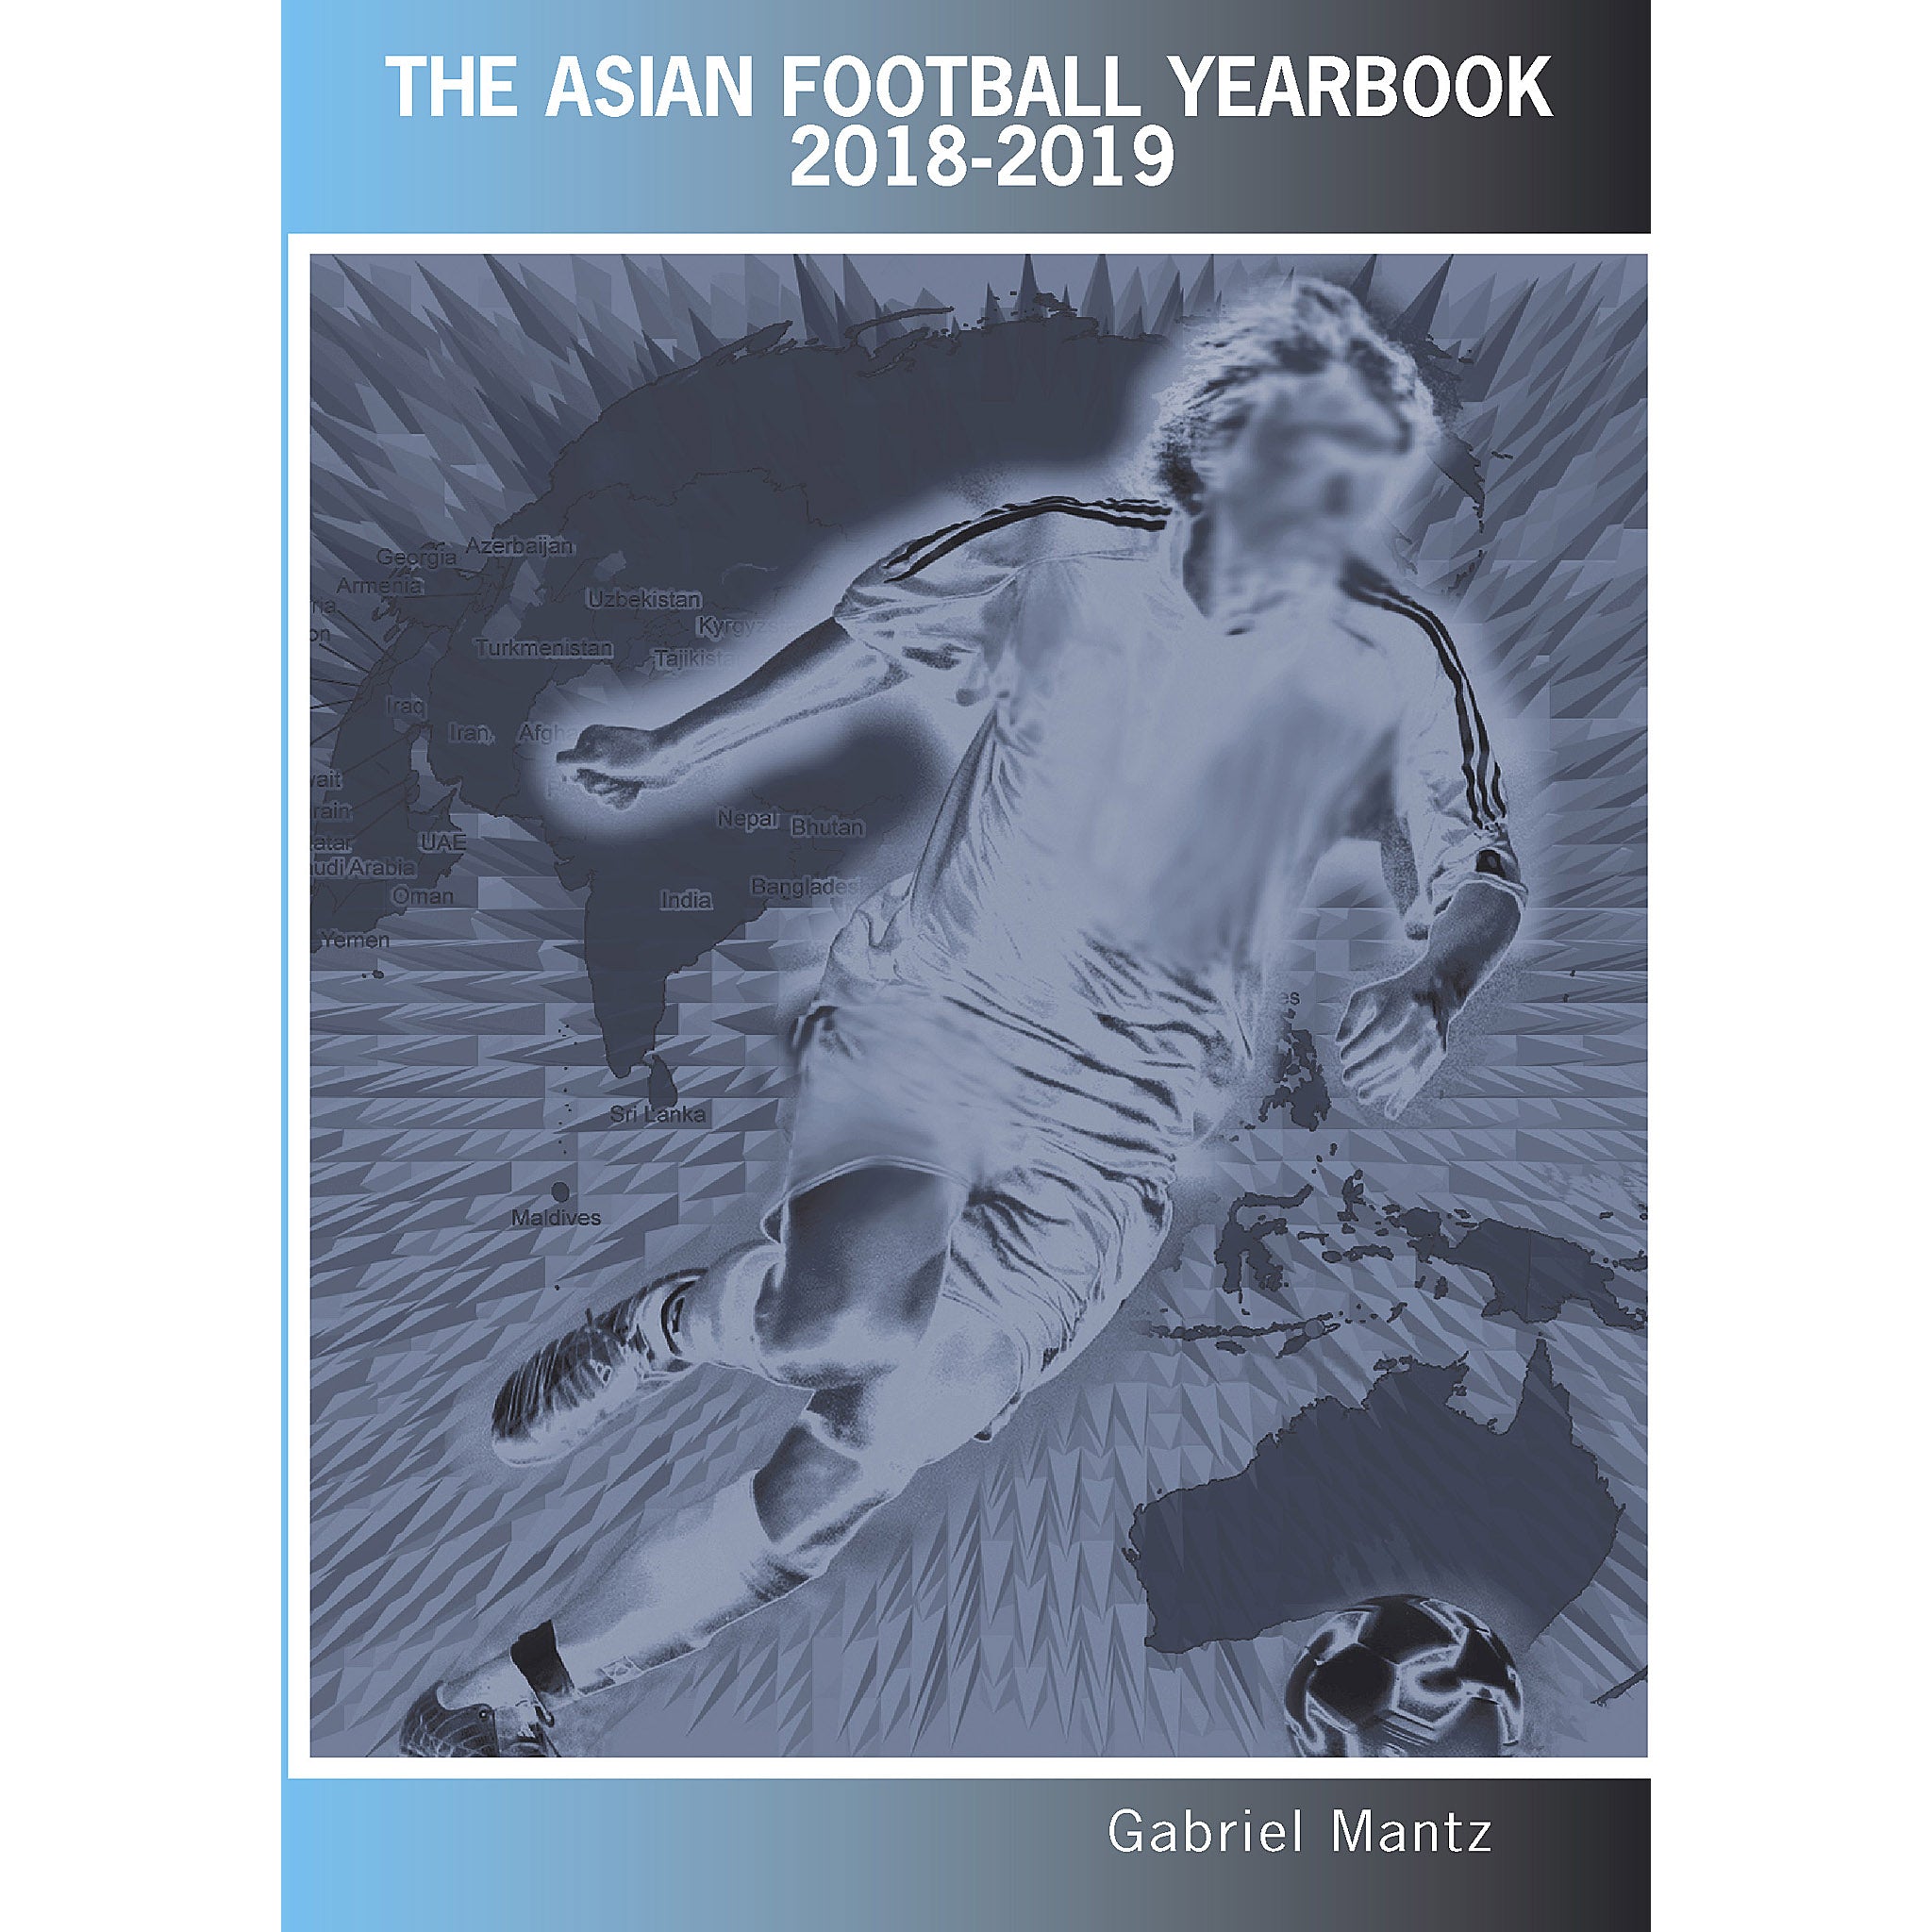 The Asian Football Yearbook 2018-2019